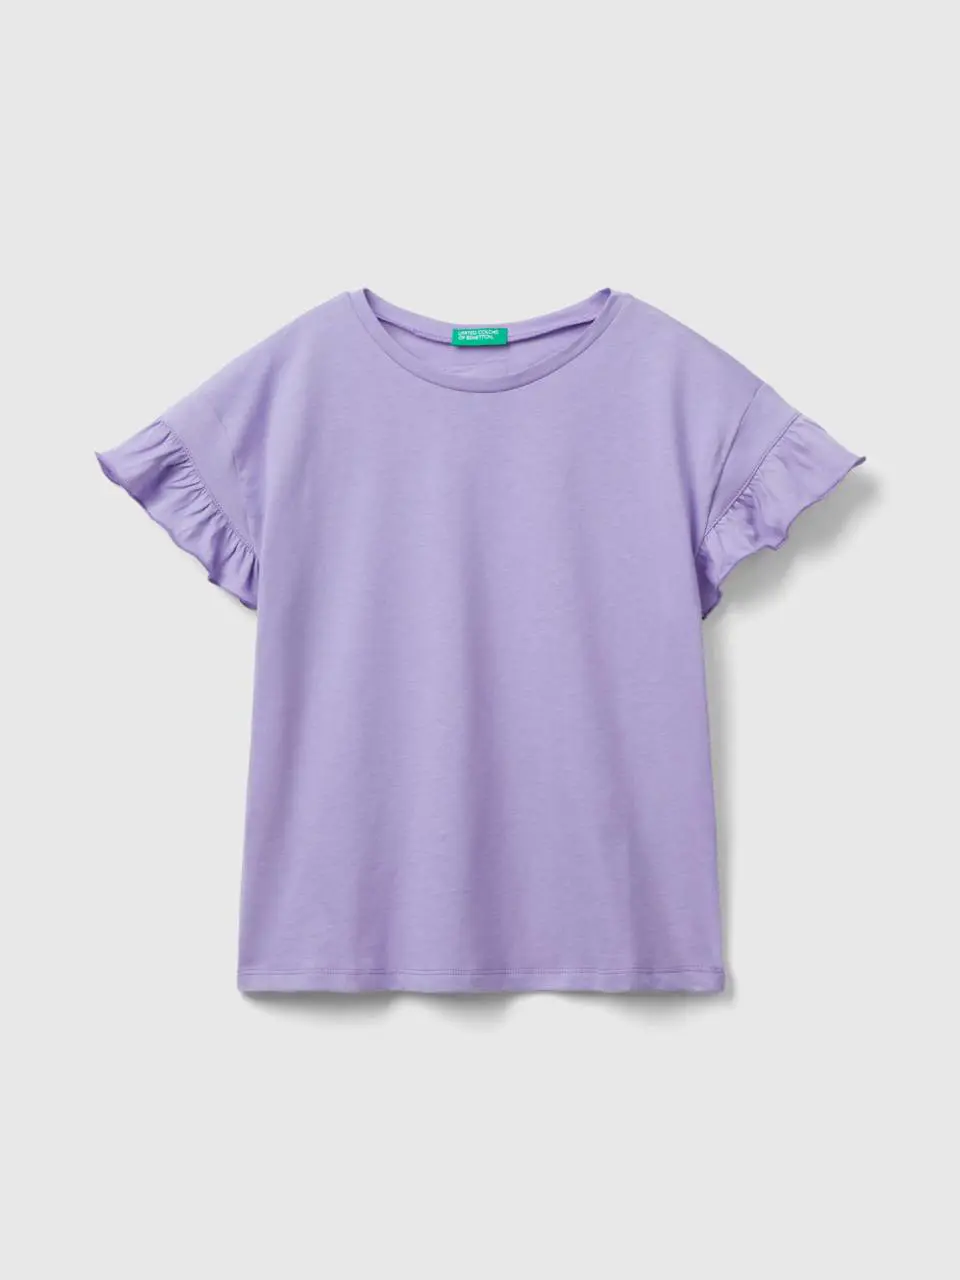 Benetton short sleeve t-shirt with rouches. 1